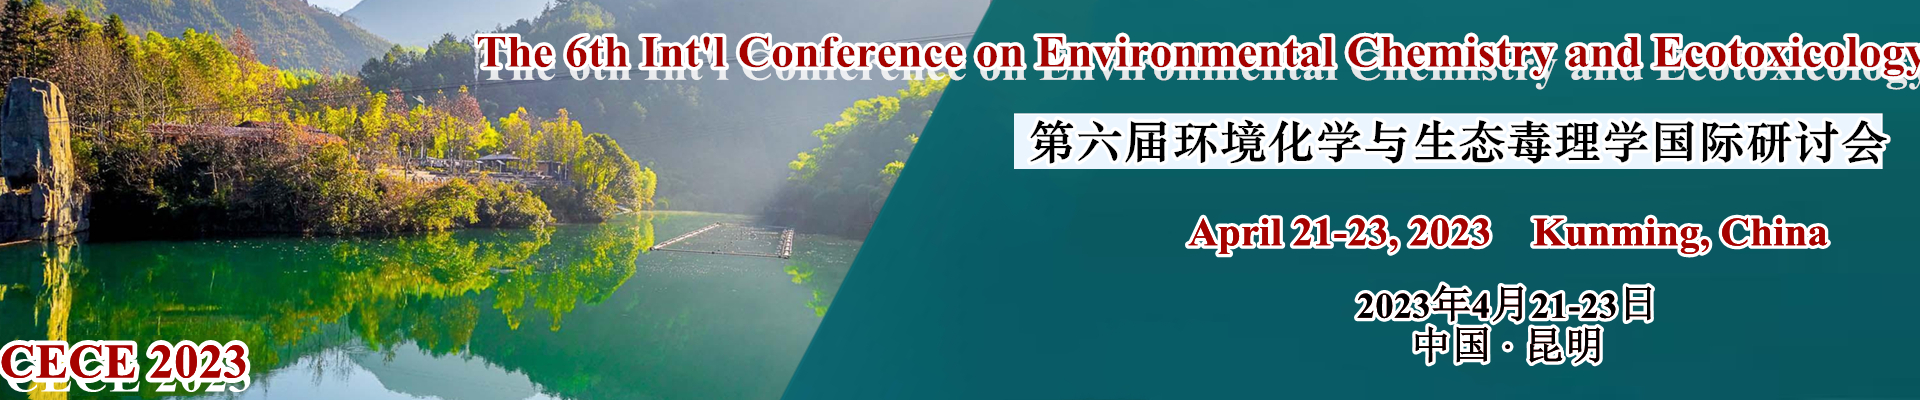 The 6th Int'l Conference on Environmental Chemistry and Ecotoxicology (CECE 2023), Kunming, Yunnan, China